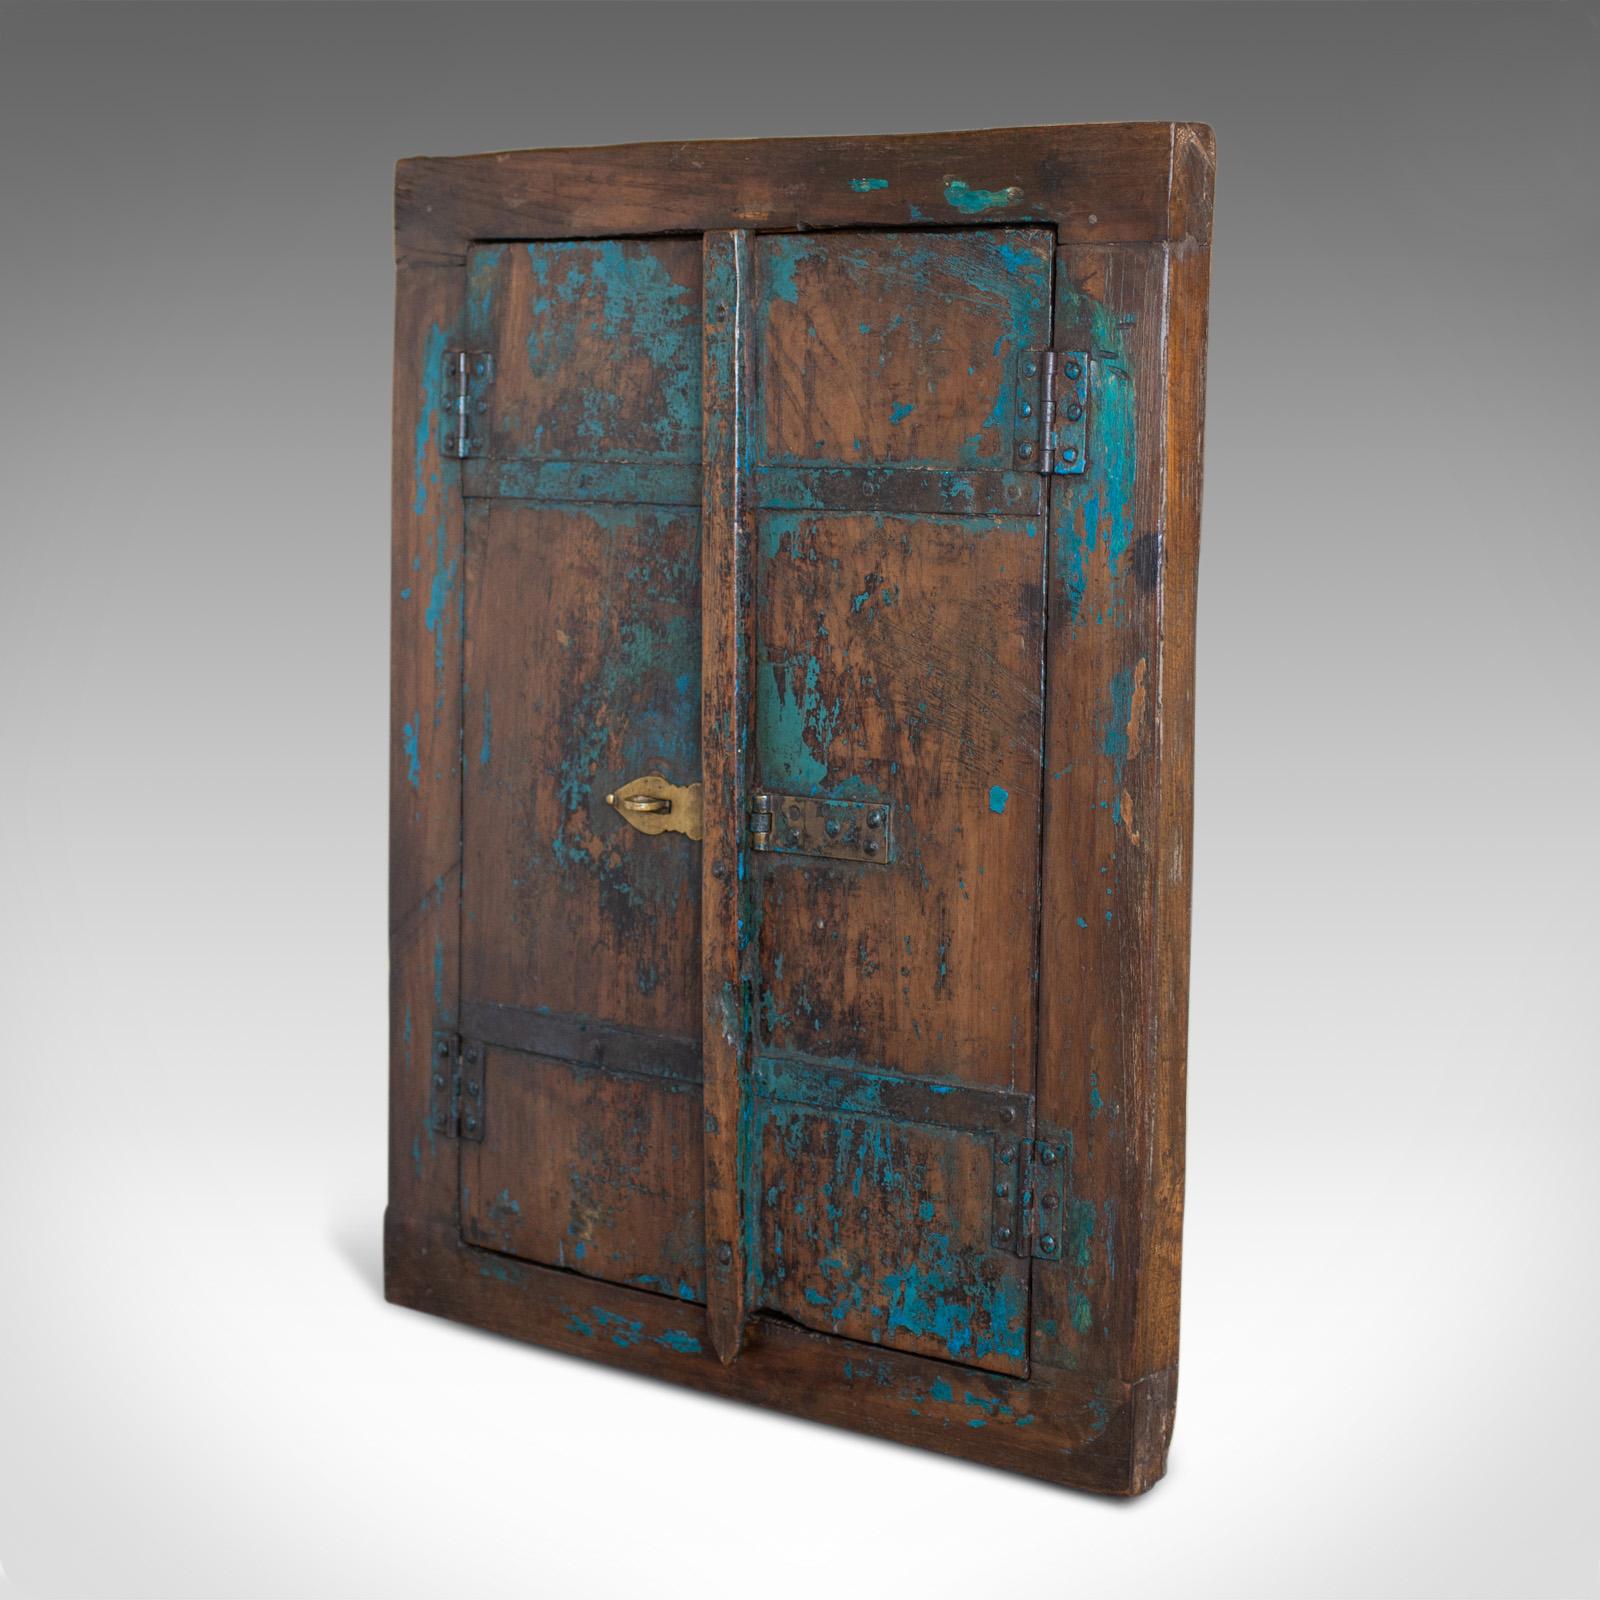 This is a vintage Asian cupboard mirror. A rustic wall cabinet with a mirror inside. Dating to the mid-late 20th century.

Charming distressed turquoise paint finish
Cabinet closing with shaped, brass hasp and fastener
Doors open easily to